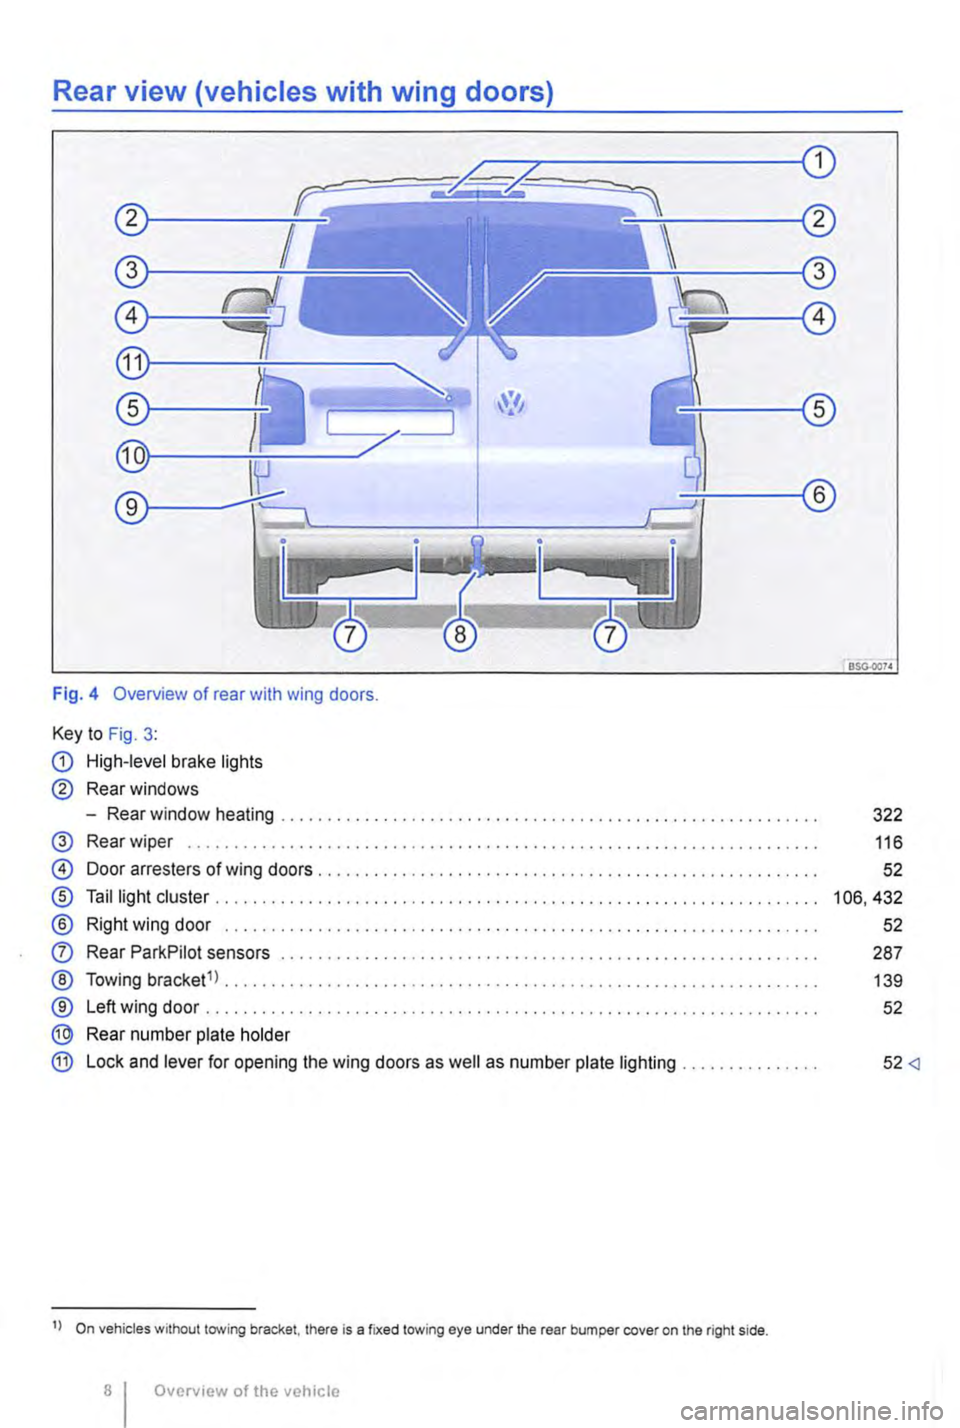 VOLKSWAGEN TRANSPORTER 2016  Owners Manual Rear view (vehicles with wing doors) 
Fig. 4 Overview of rear with wing doors. 
Key to Fig. 3: 
G) High-level brake lights 
® Rear windows 
-Rear window heating ......................................